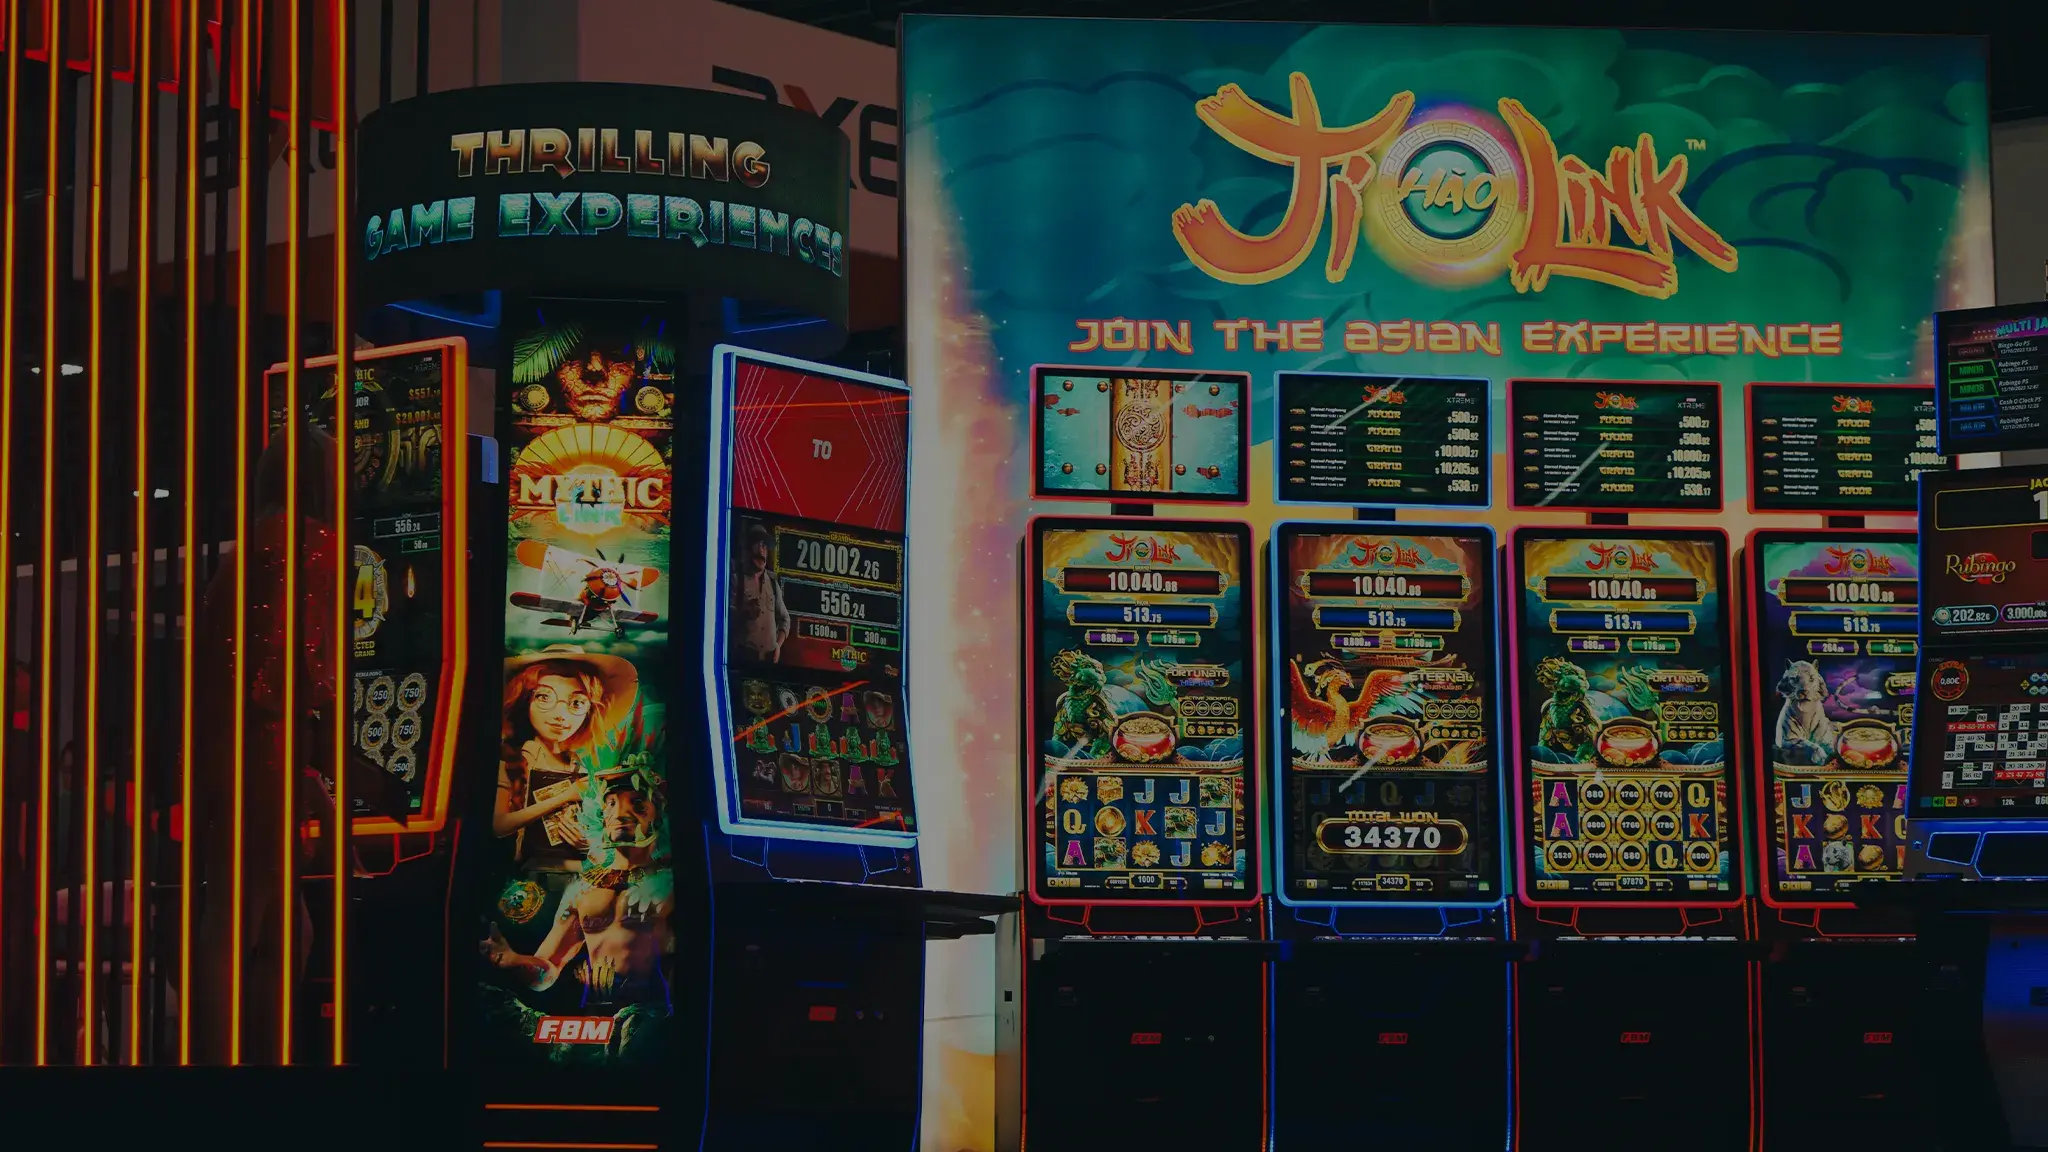 Two FBM casino cabinets with slots games showcased in an international event of the casino industry